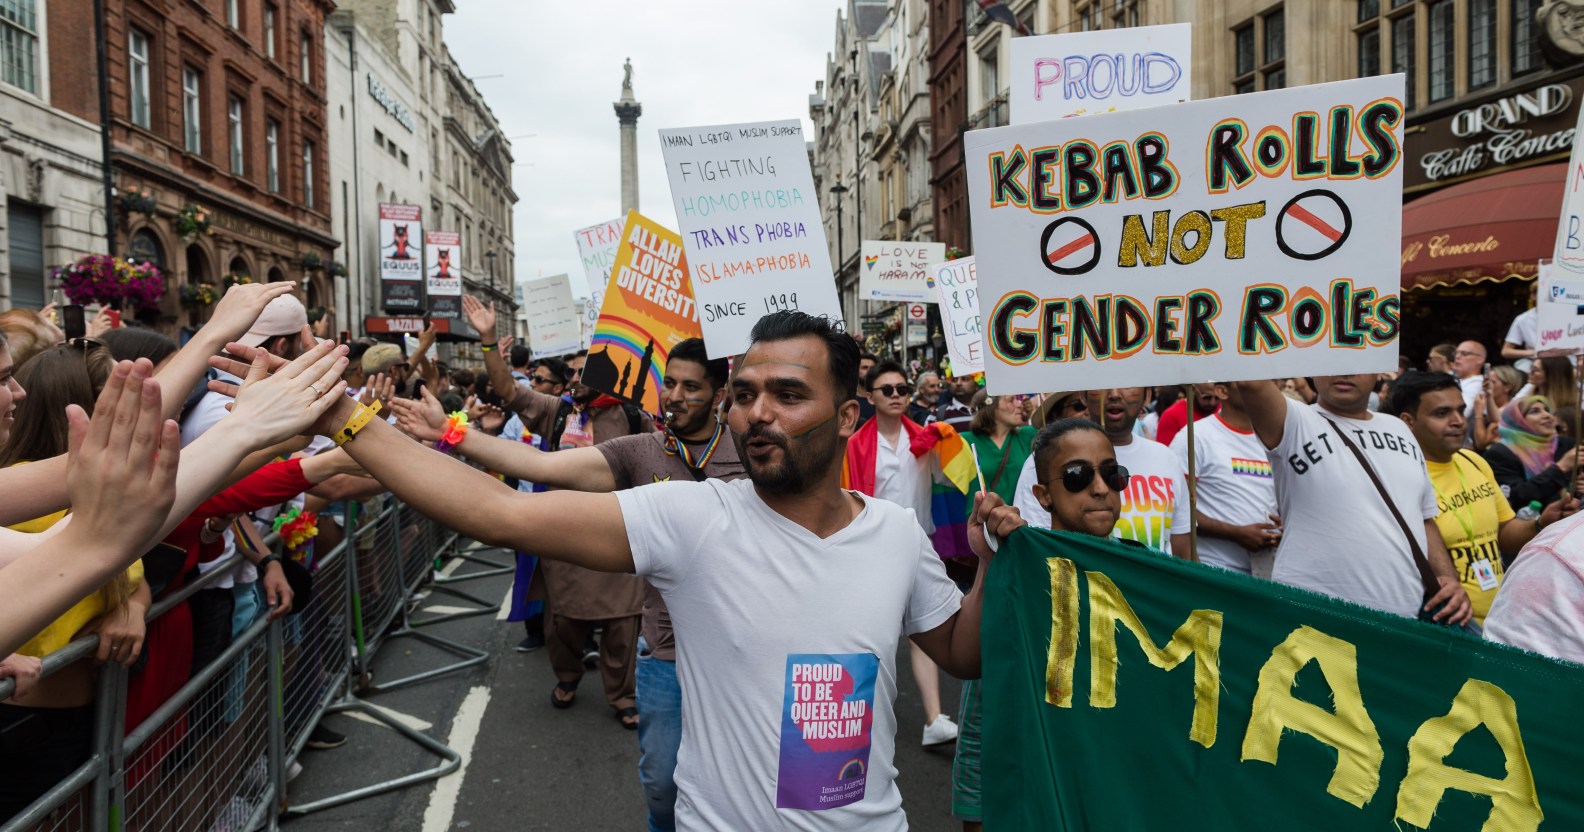 A photo from the UK's first ever Muslim LGBT Pride festival showing a Muslim man holding his hand out to the crowd lining the streets